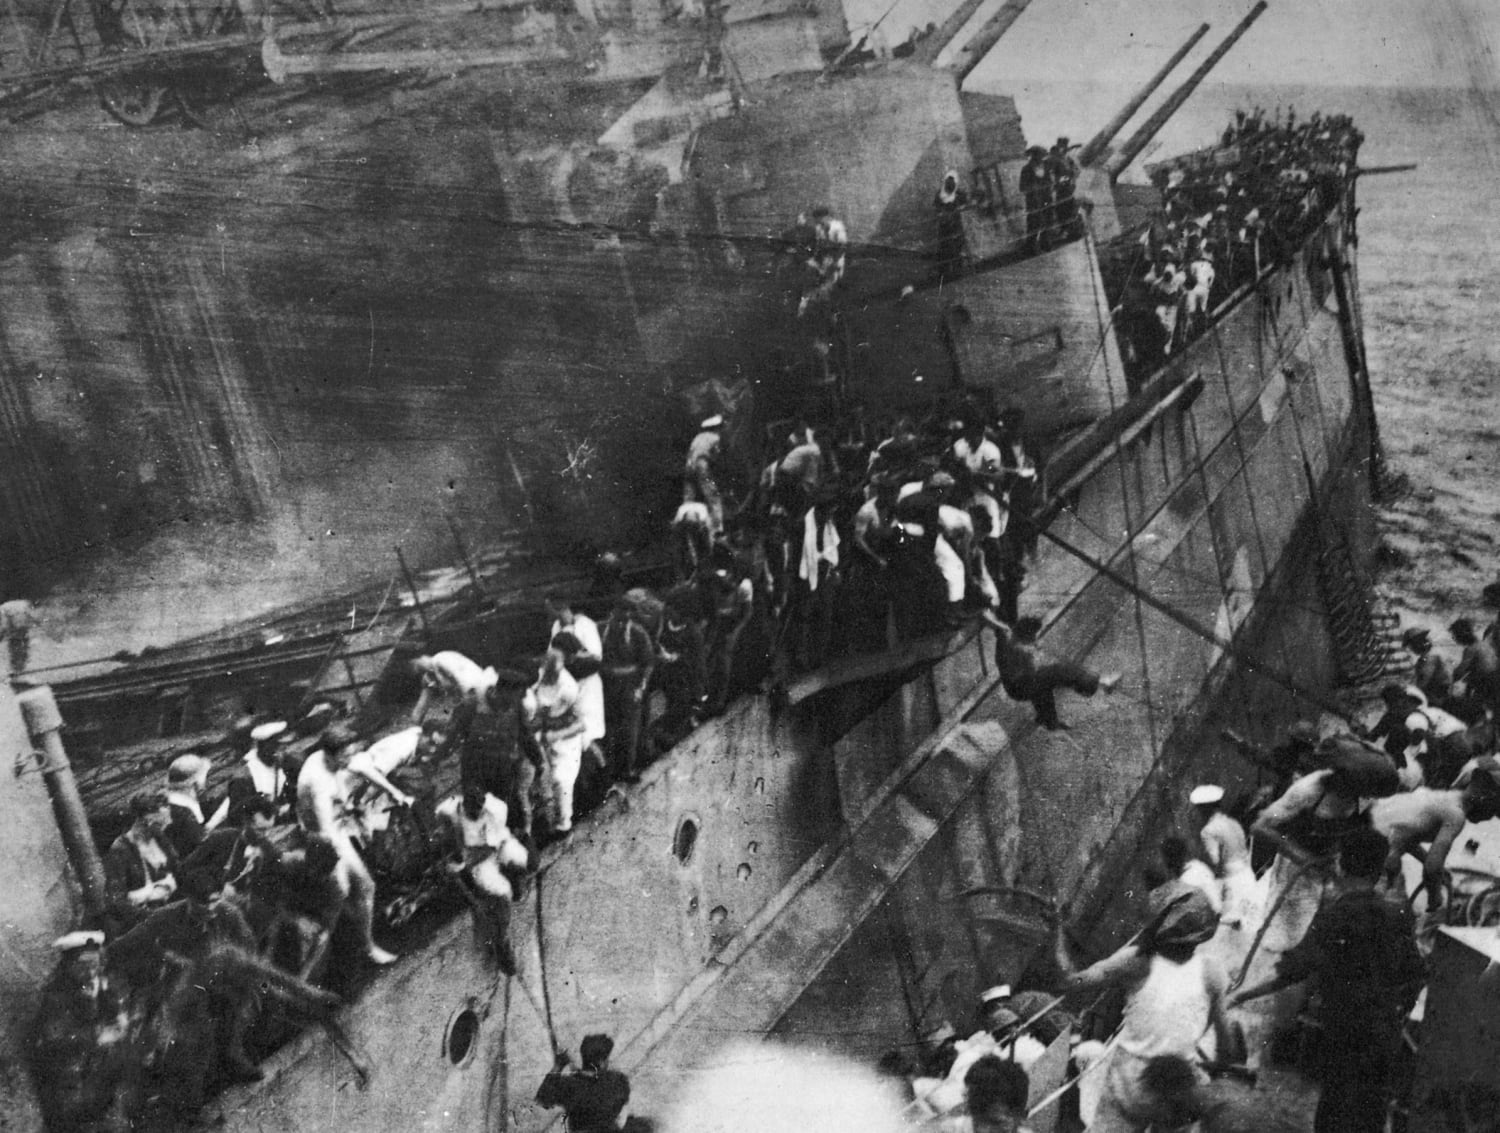 "Britain's Pearl Harbour"; sailors jump from the sinking battleship HMS Prince of Wales to the waiting destroyer HMS Electra. By the end of the day, 840 men would be dead and a battleship and battlecruiser sunk; for the cost of 4 Japanese dive bombers. 10th December 1941